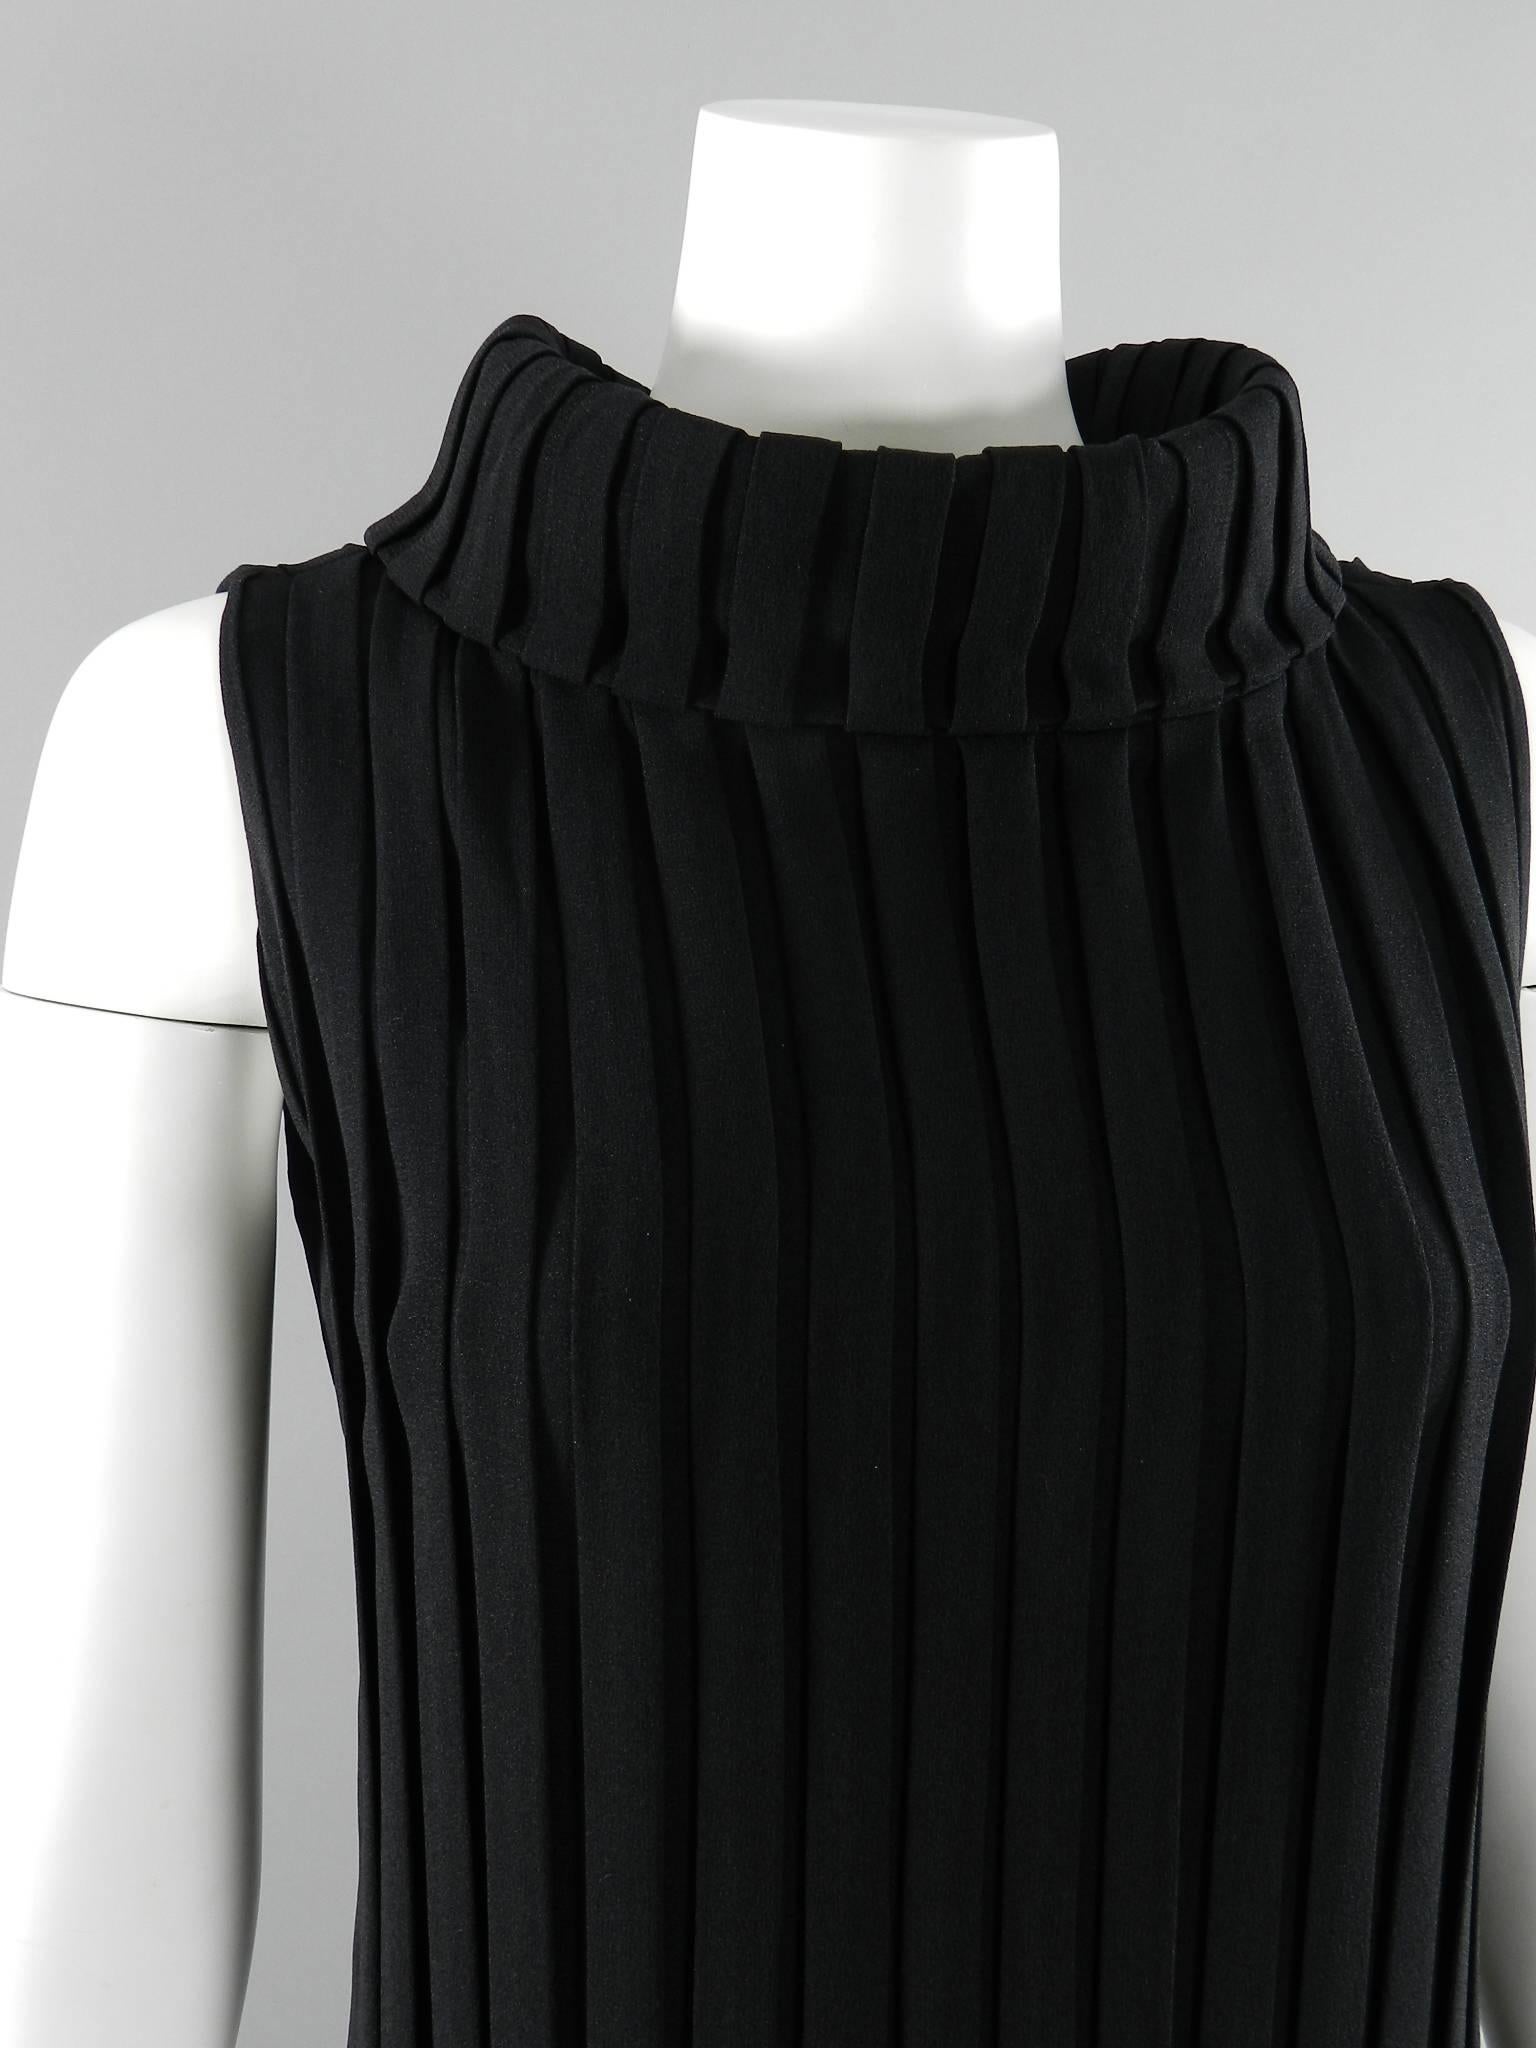 Vintage 1960's Mademoiselle Ricci by Nina Ricci black pleated column gown. Vertical pleats at front and back of dress that open up at bottom skirt hem. Sides of dress have a solid panel of un-pleated fabric. Center metal back zipper and fold-down